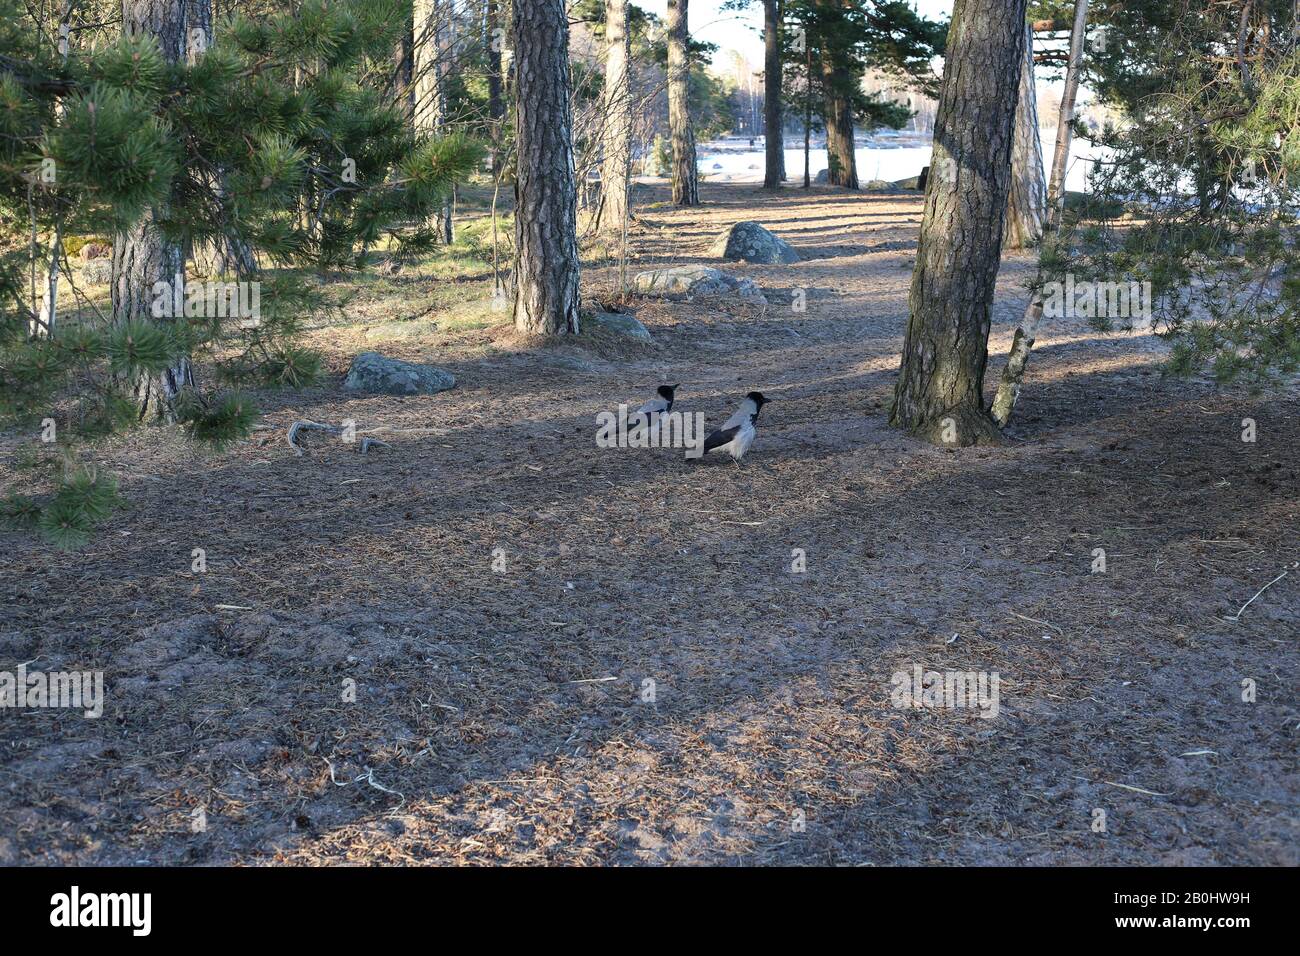 Two hooded crow (corvus corone cornix) birds in a forest in Espoo, Finland. In this photo you see the birds, multiple pine trees, rocks and sand. Stock Photo